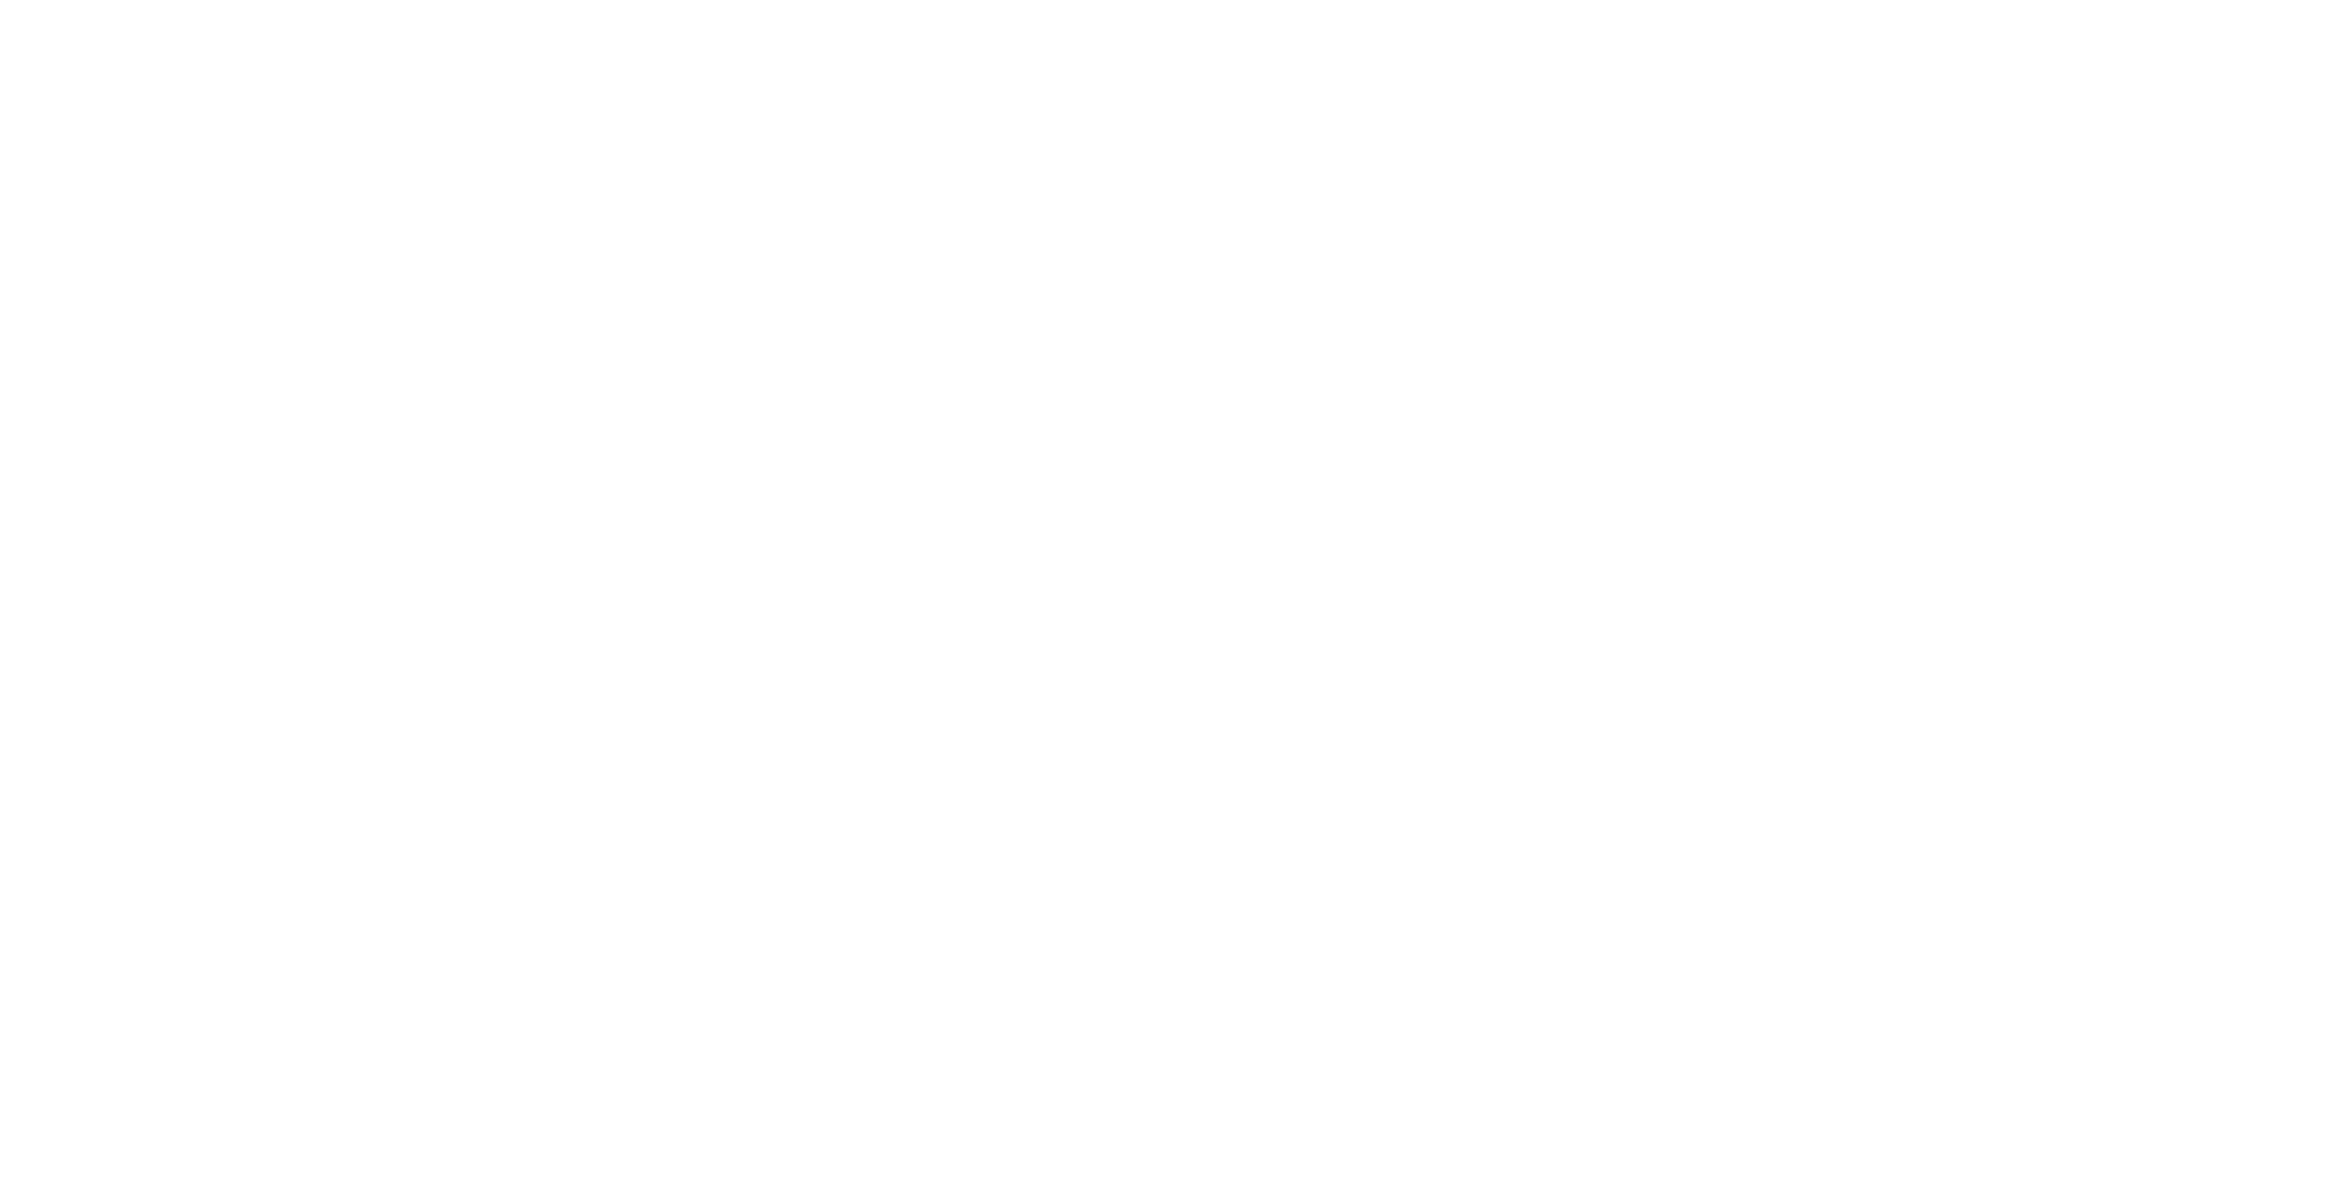 DEAFTEQ